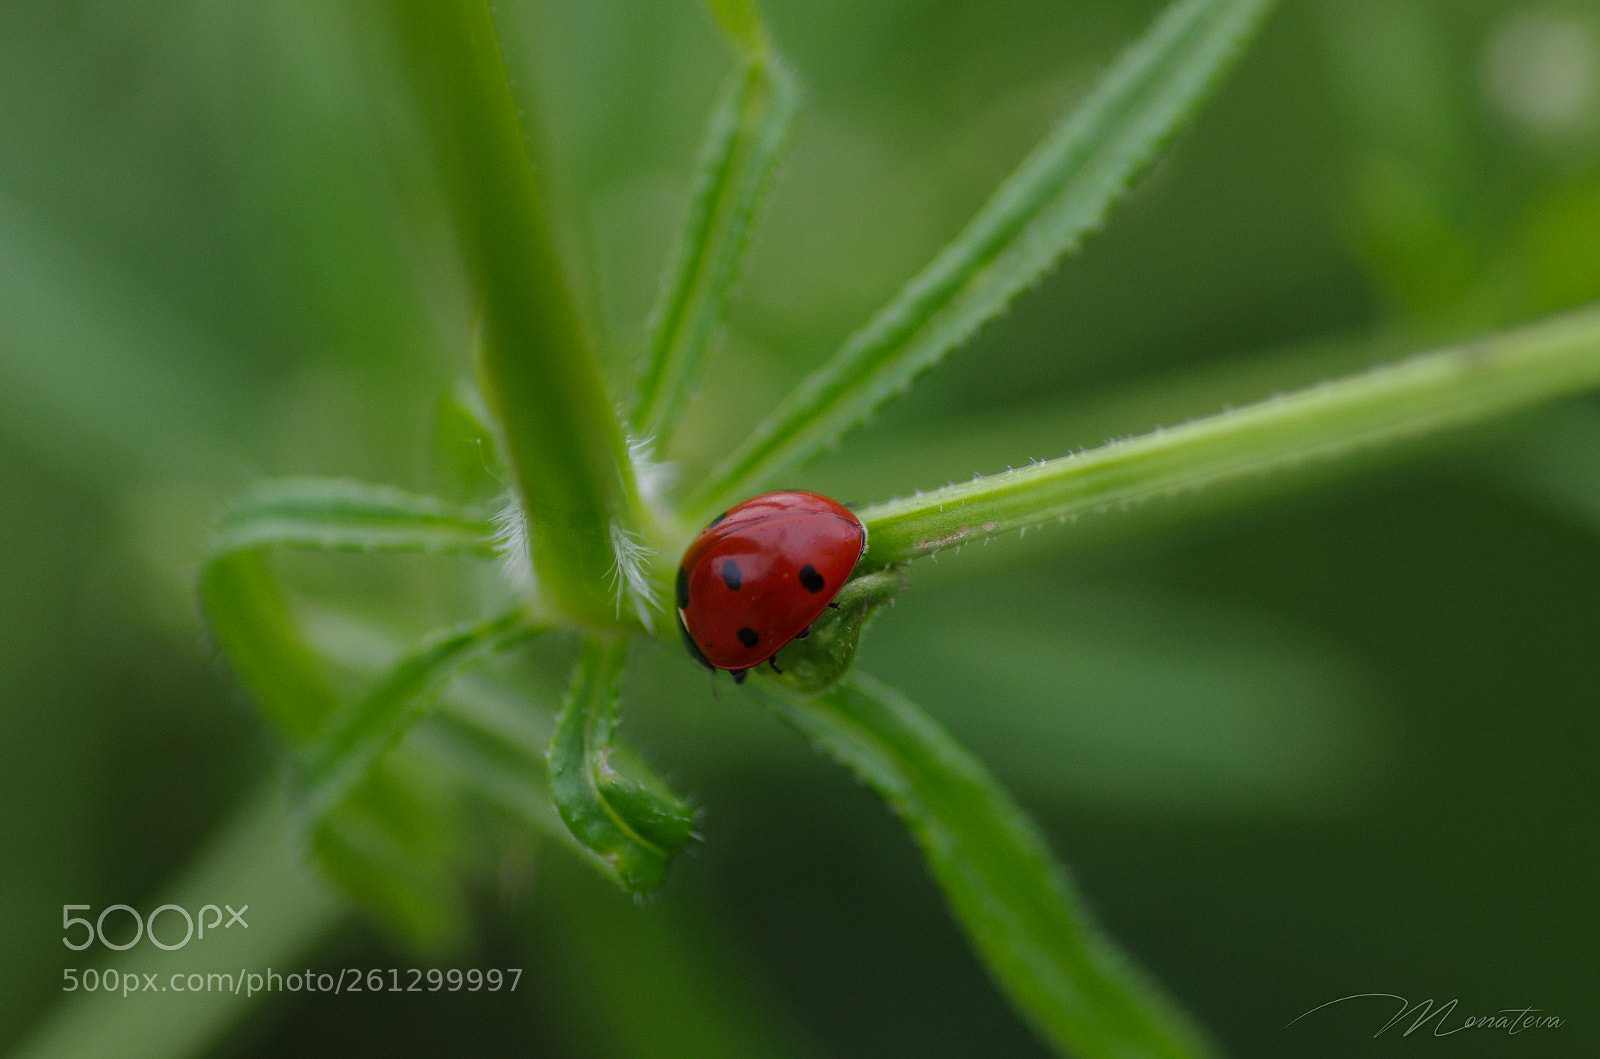 Pentax K-5 sample photo. Little ladybug in a photography